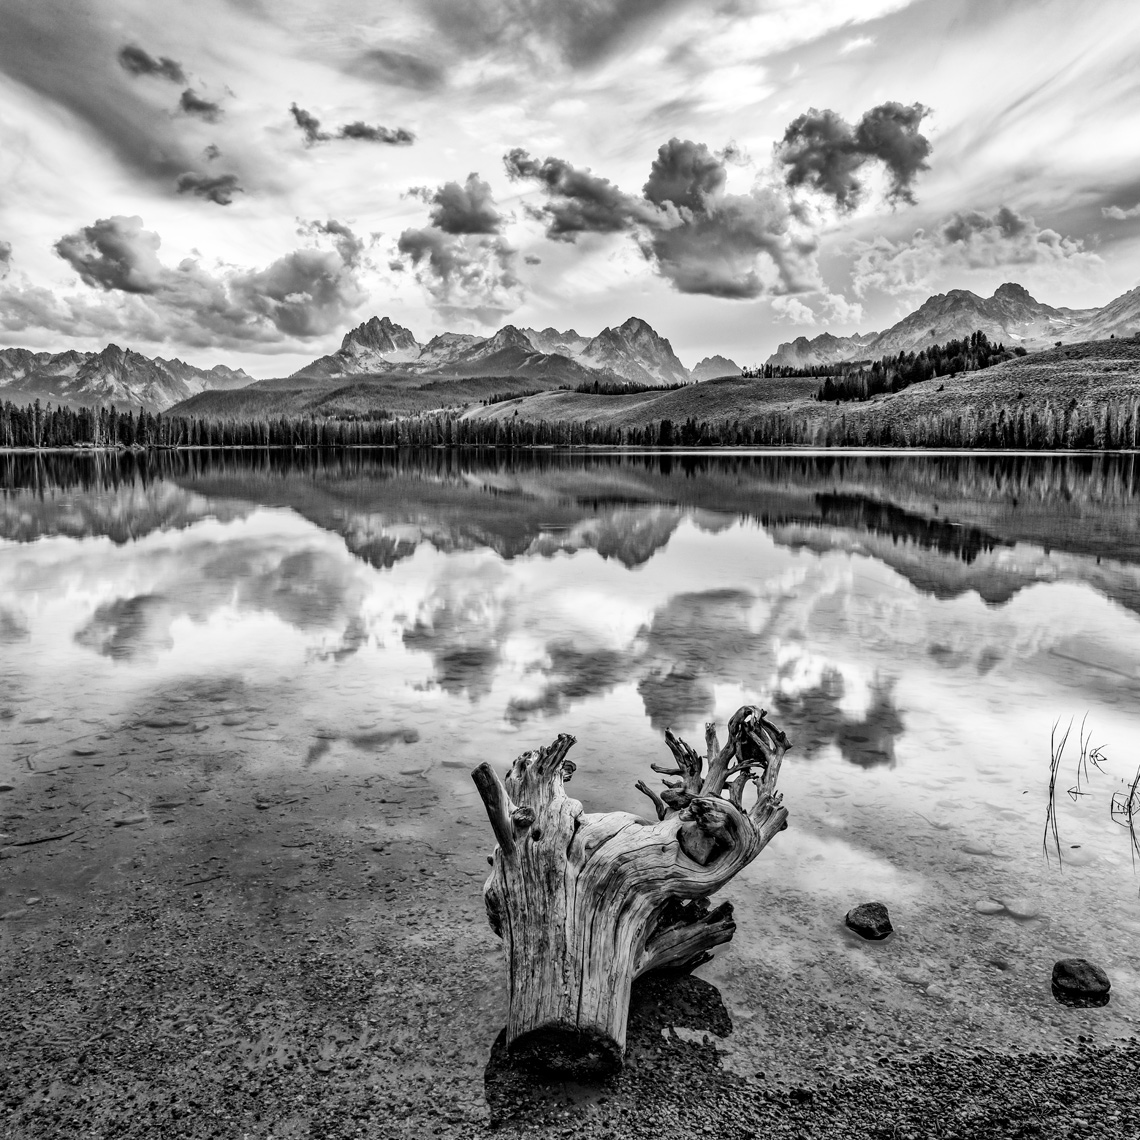 Little Redfish Lake - Sawtooth Wilderness, 30x40 Framed Pigmented Ink Print, $ 1400.00